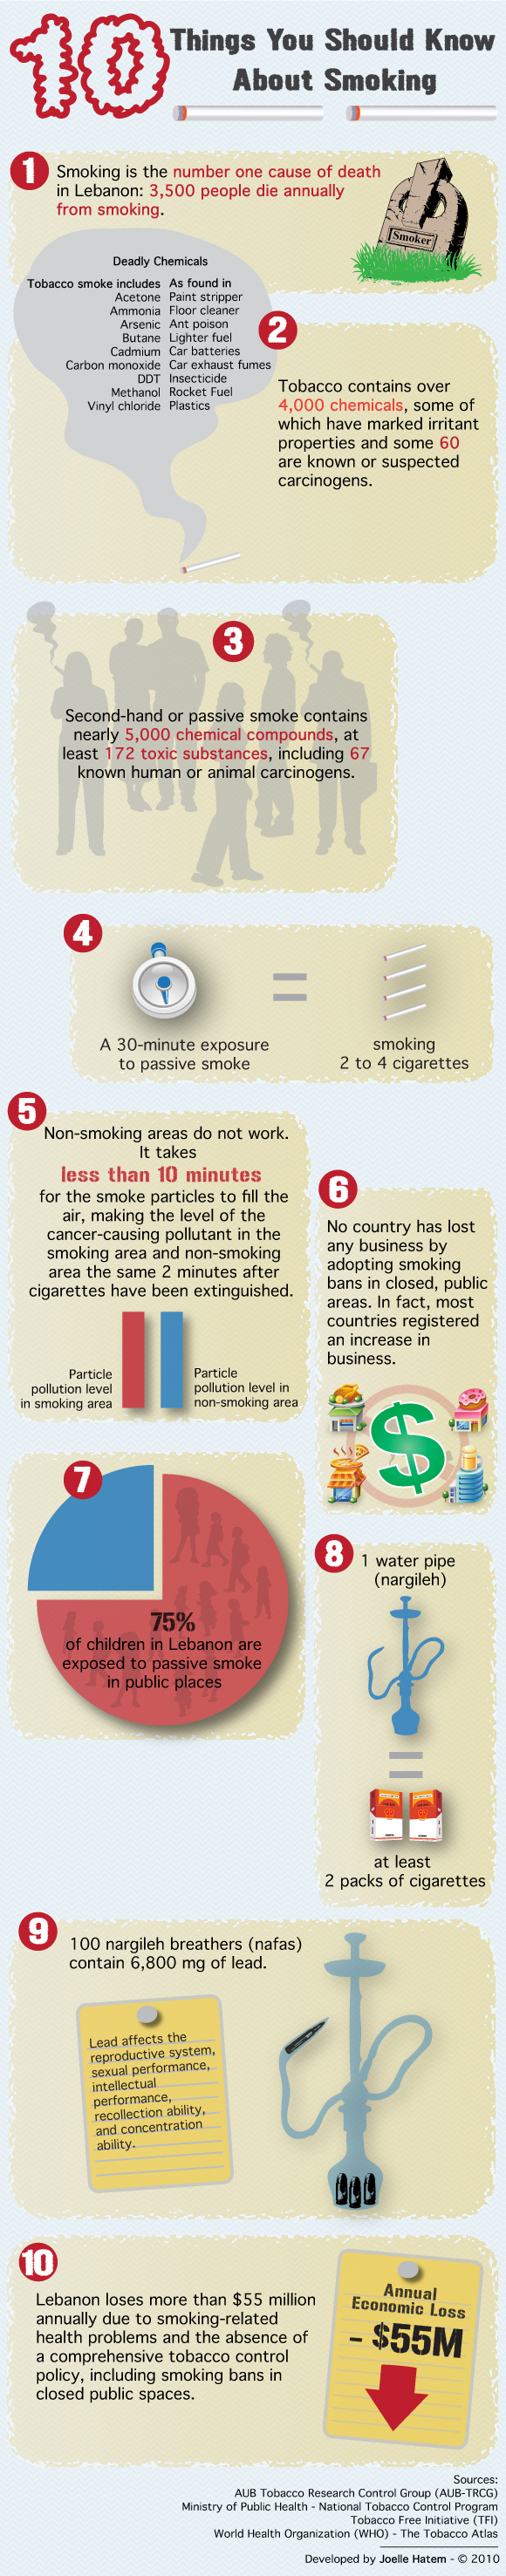 10 Things You Should Know About Smoking In Lebanon